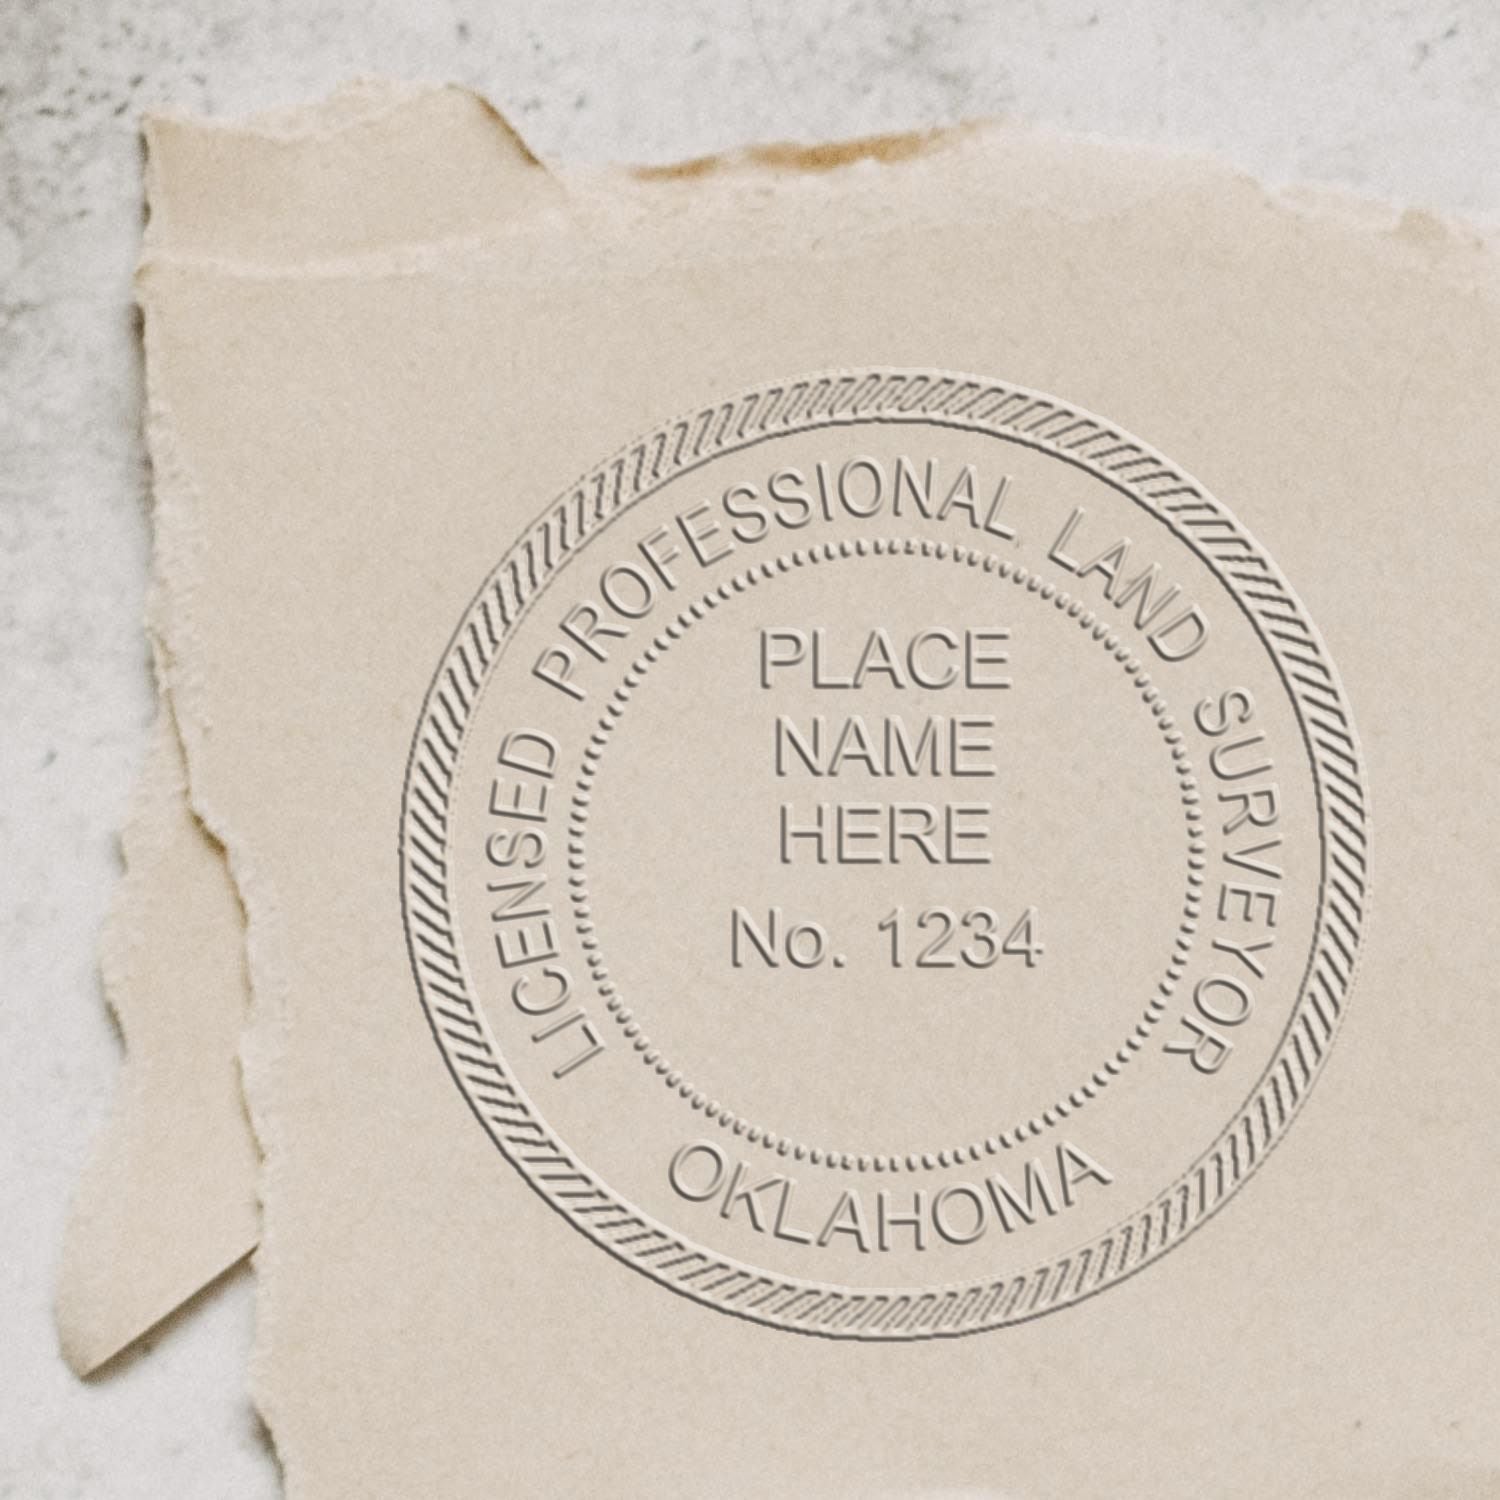 An alternative view of the Heavy Duty Cast Iron Oklahoma Land Surveyor Seal Embosser stamped on a sheet of paper showing the image in use